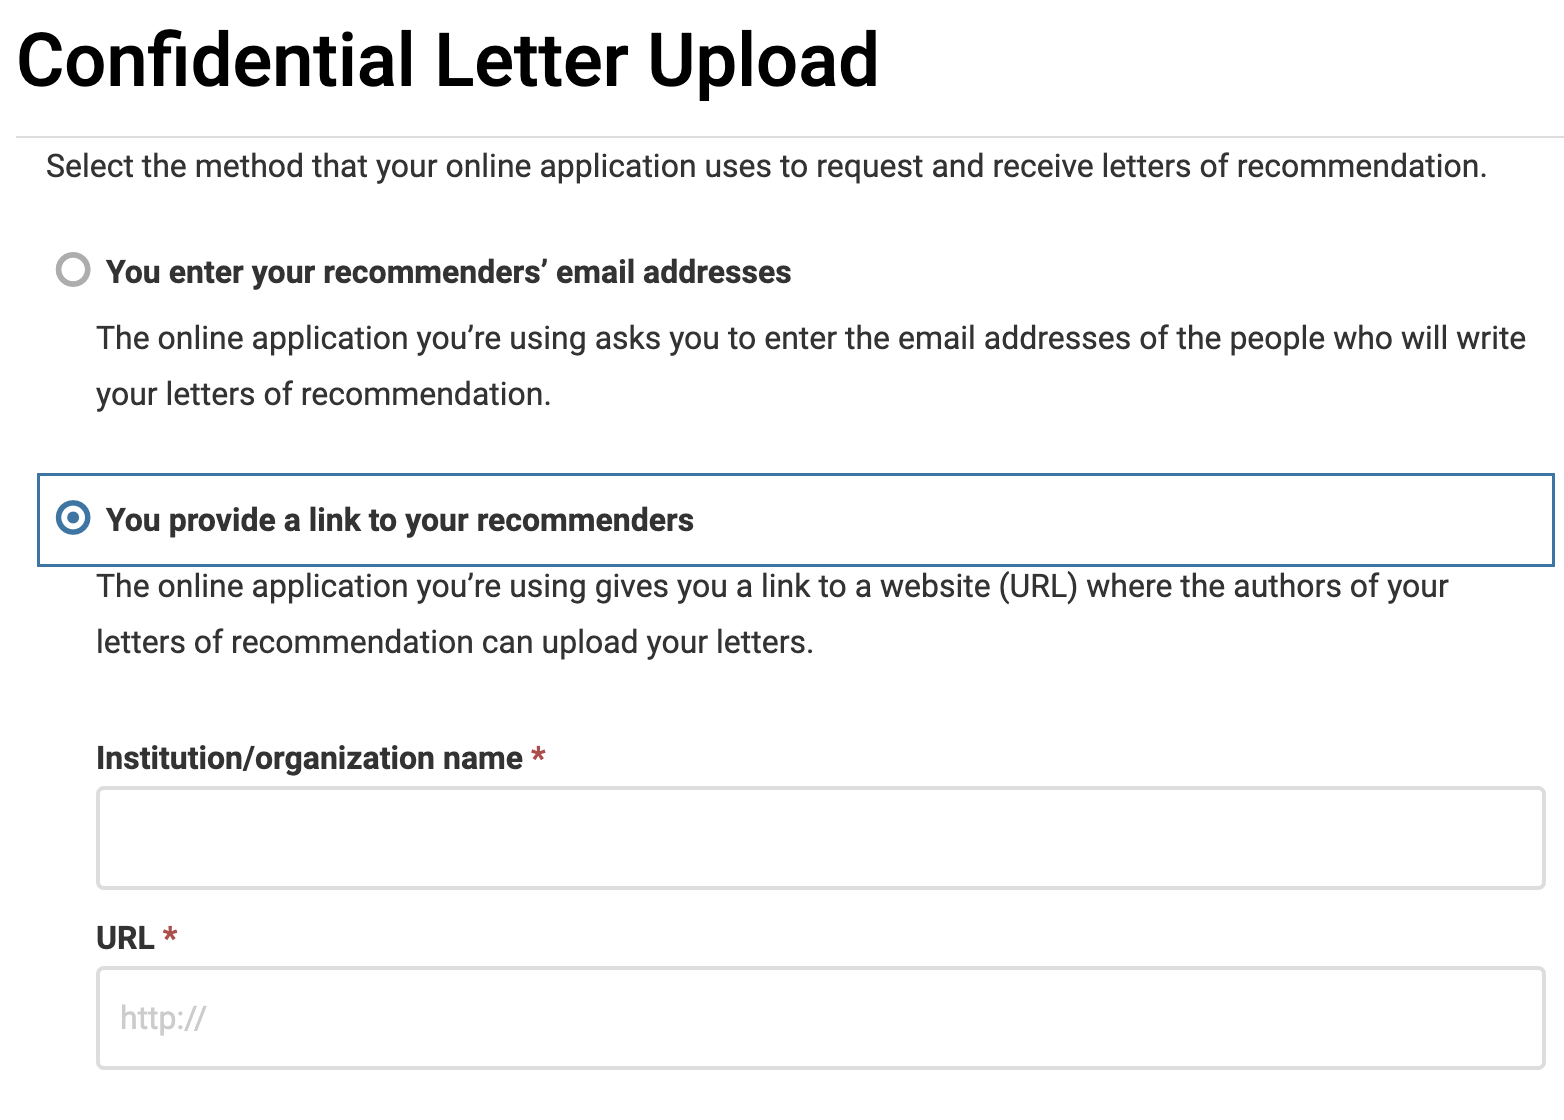 Confidential Letter Upload page with You provide a link to your recommenders' selected below